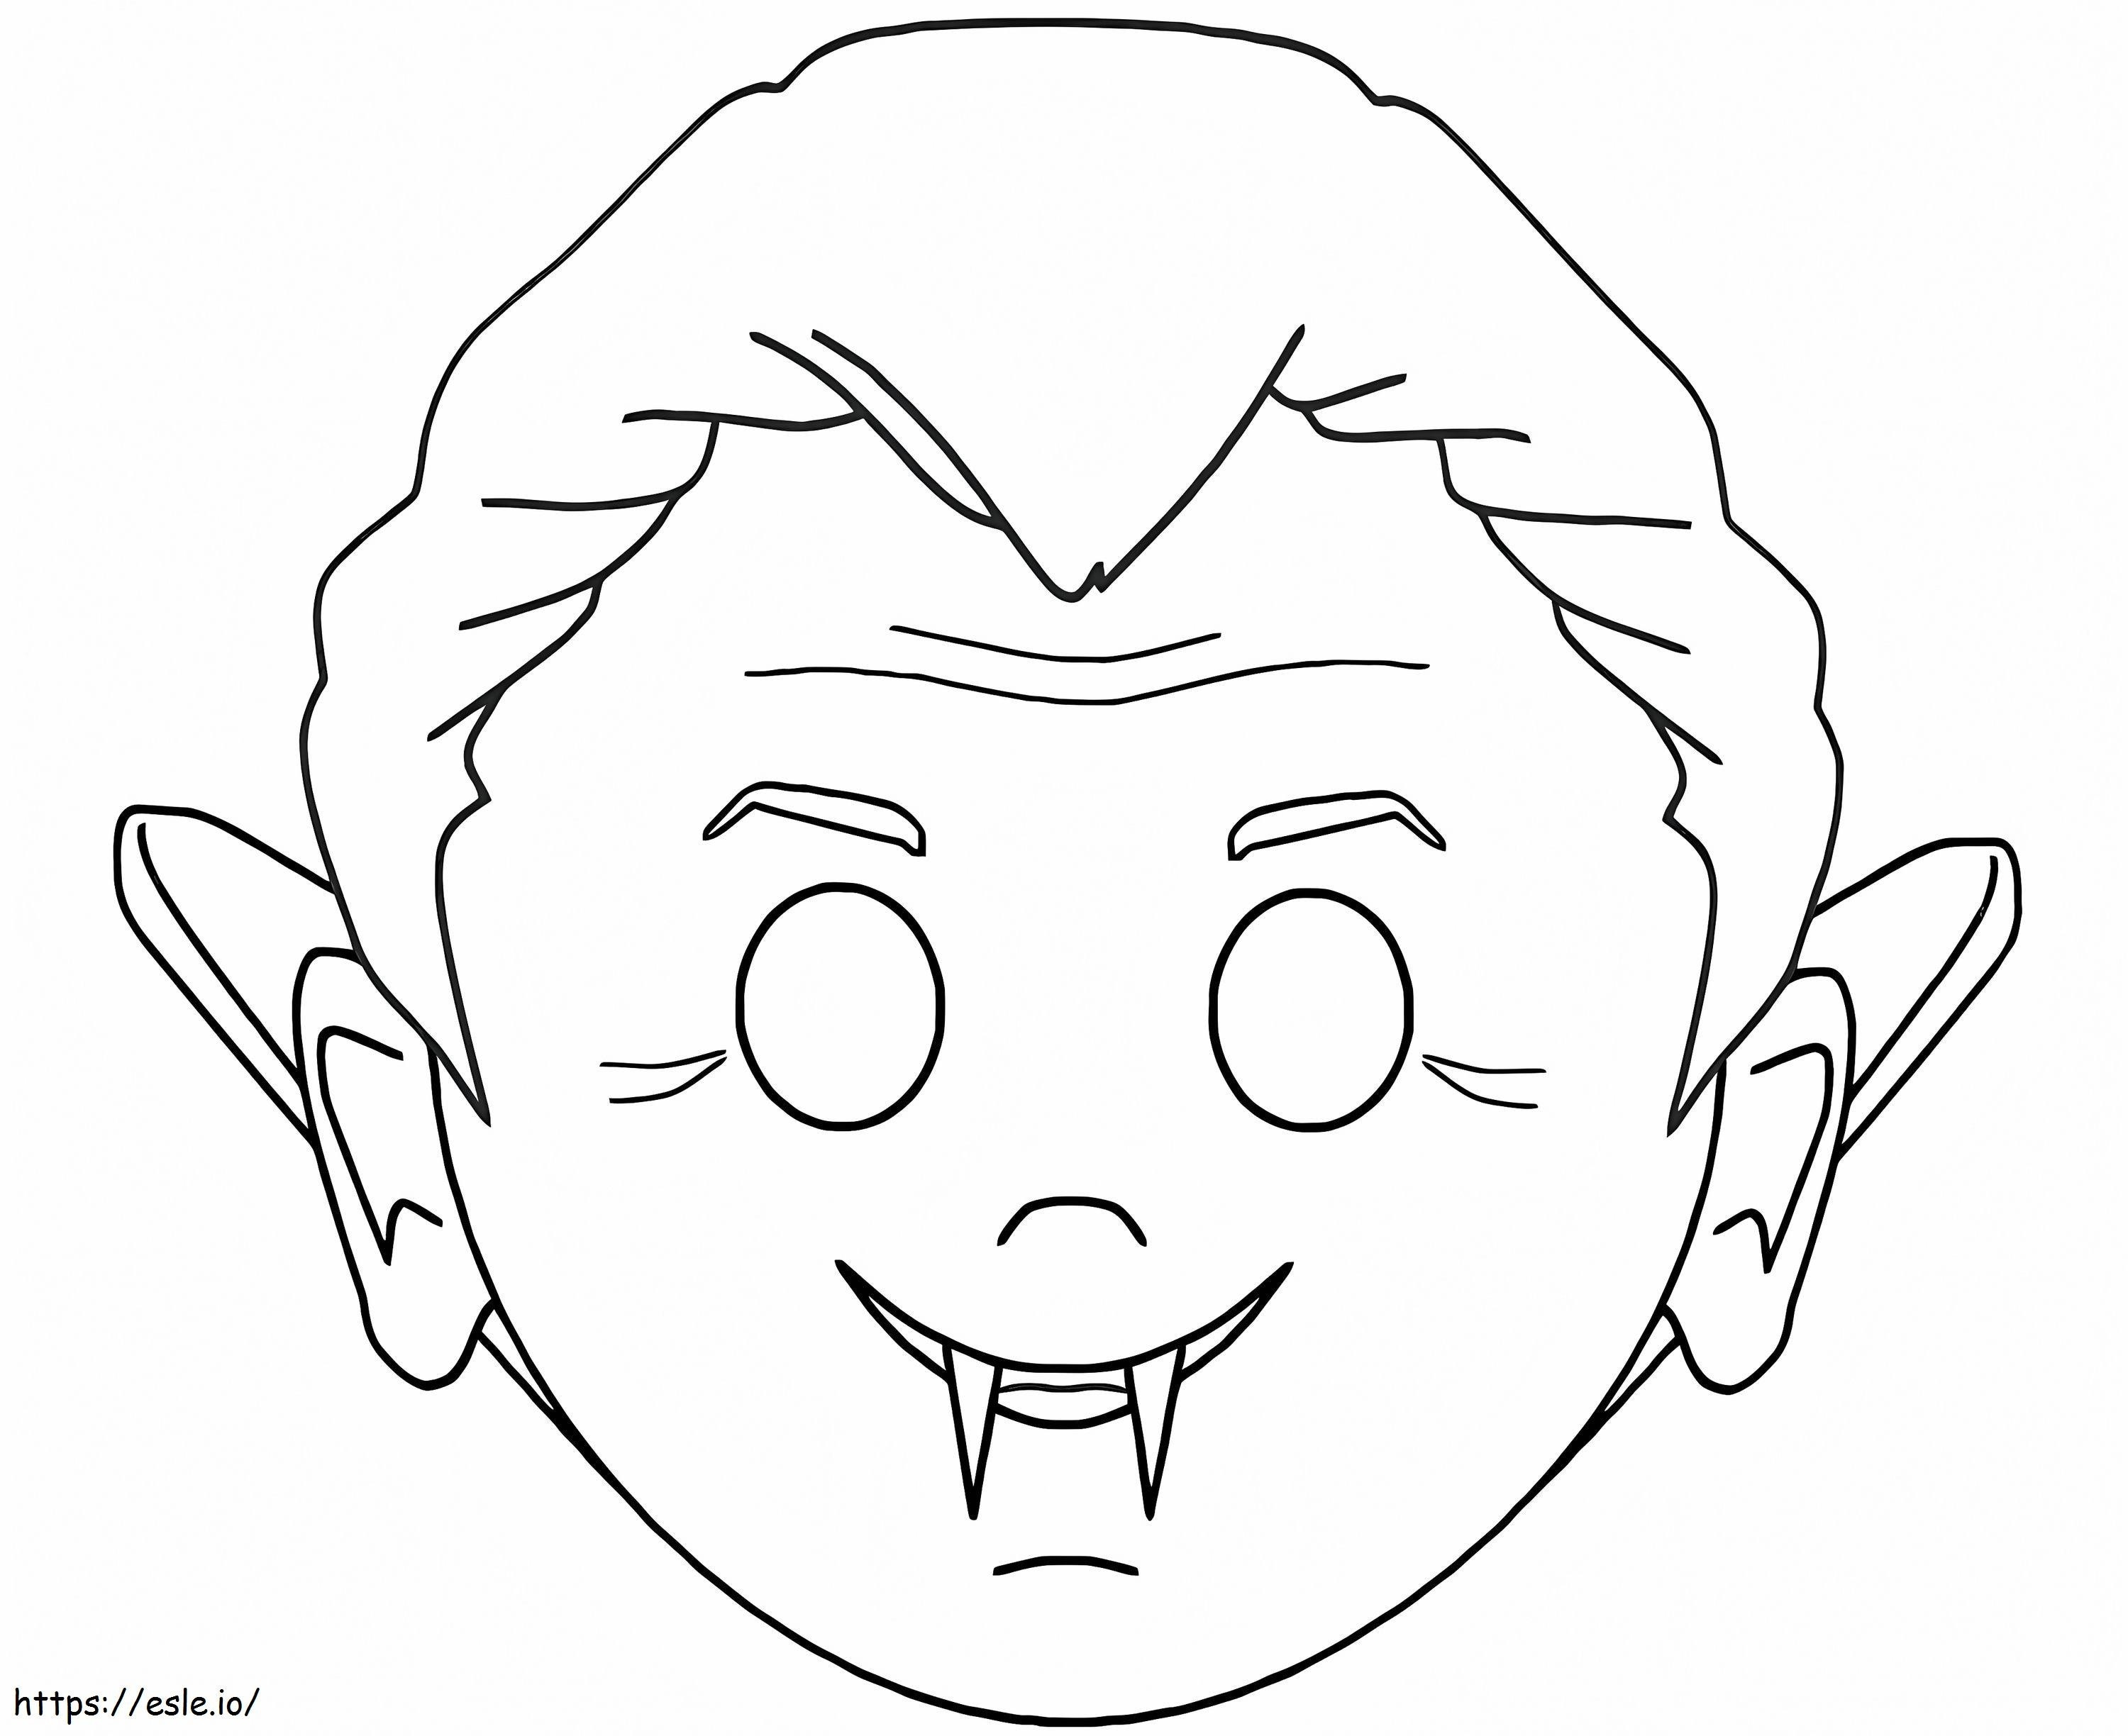 Halloween Vampire Mask coloring page